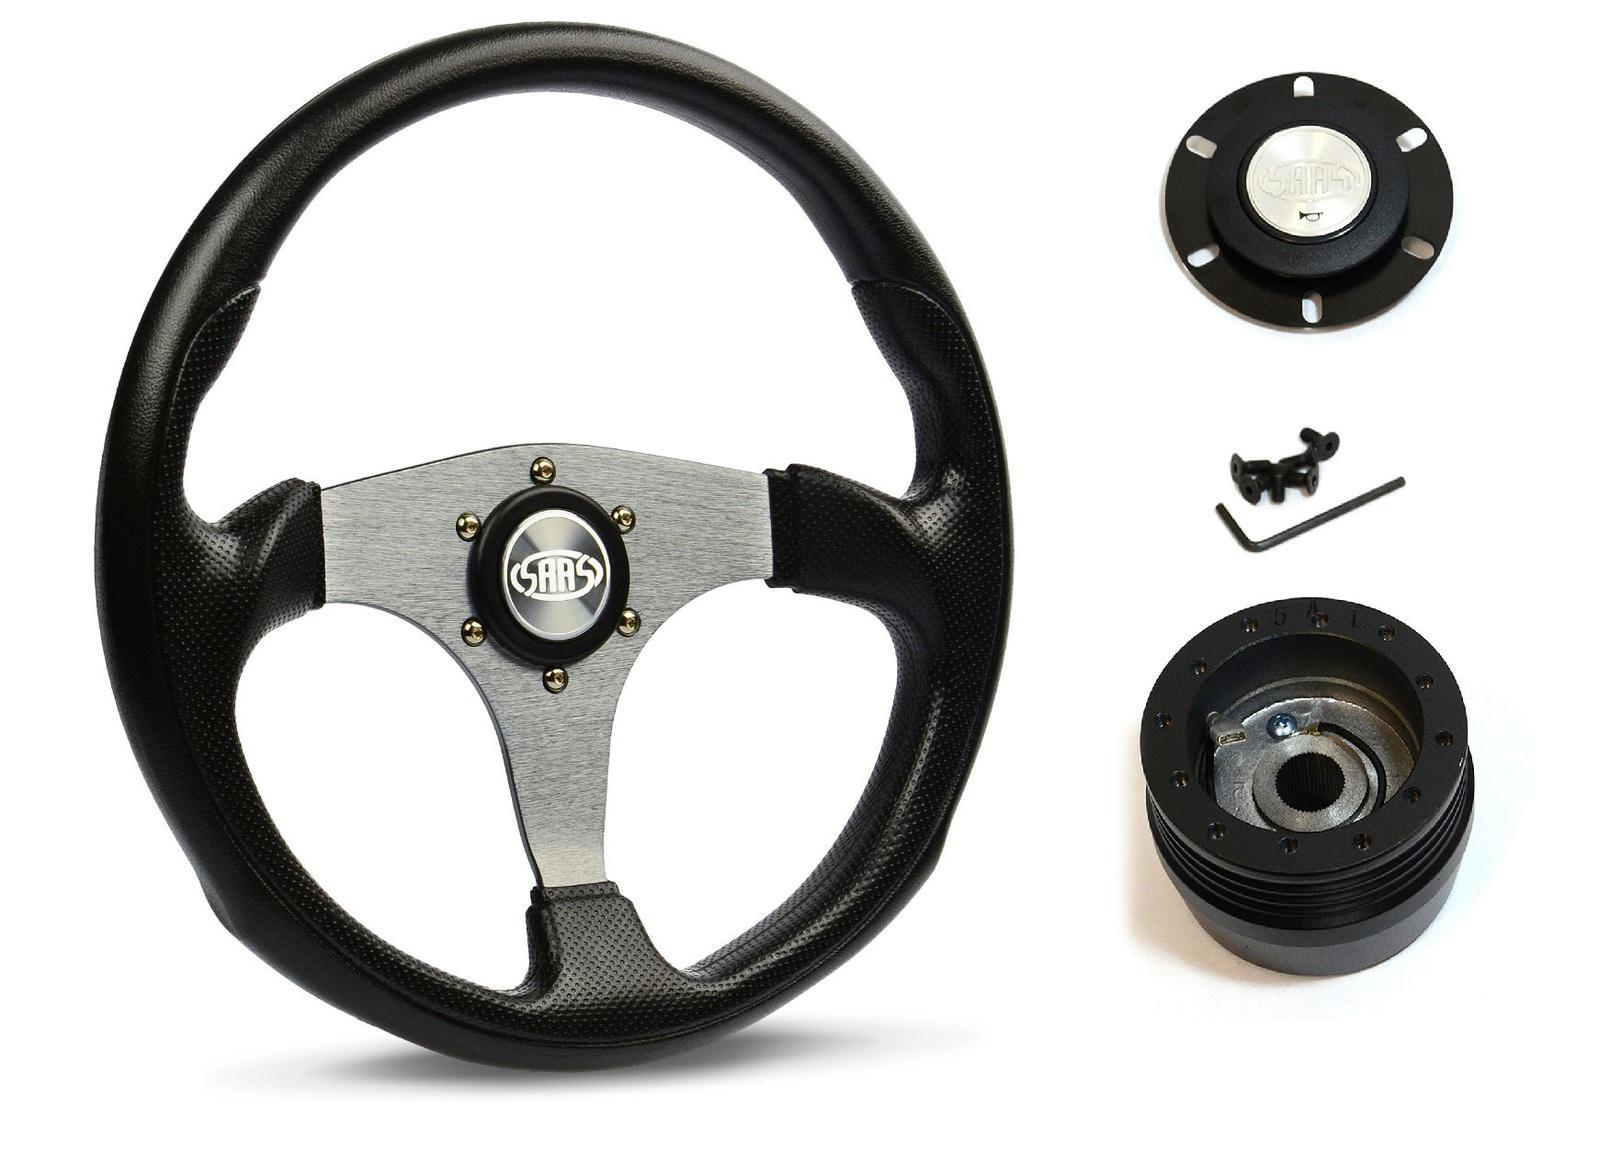 SAAS Steering Wheel Poly 14" ADR Octane Titanium Spoke SW515T-R and SAAS boss kit for Ford Corsair All Models 1988-1996